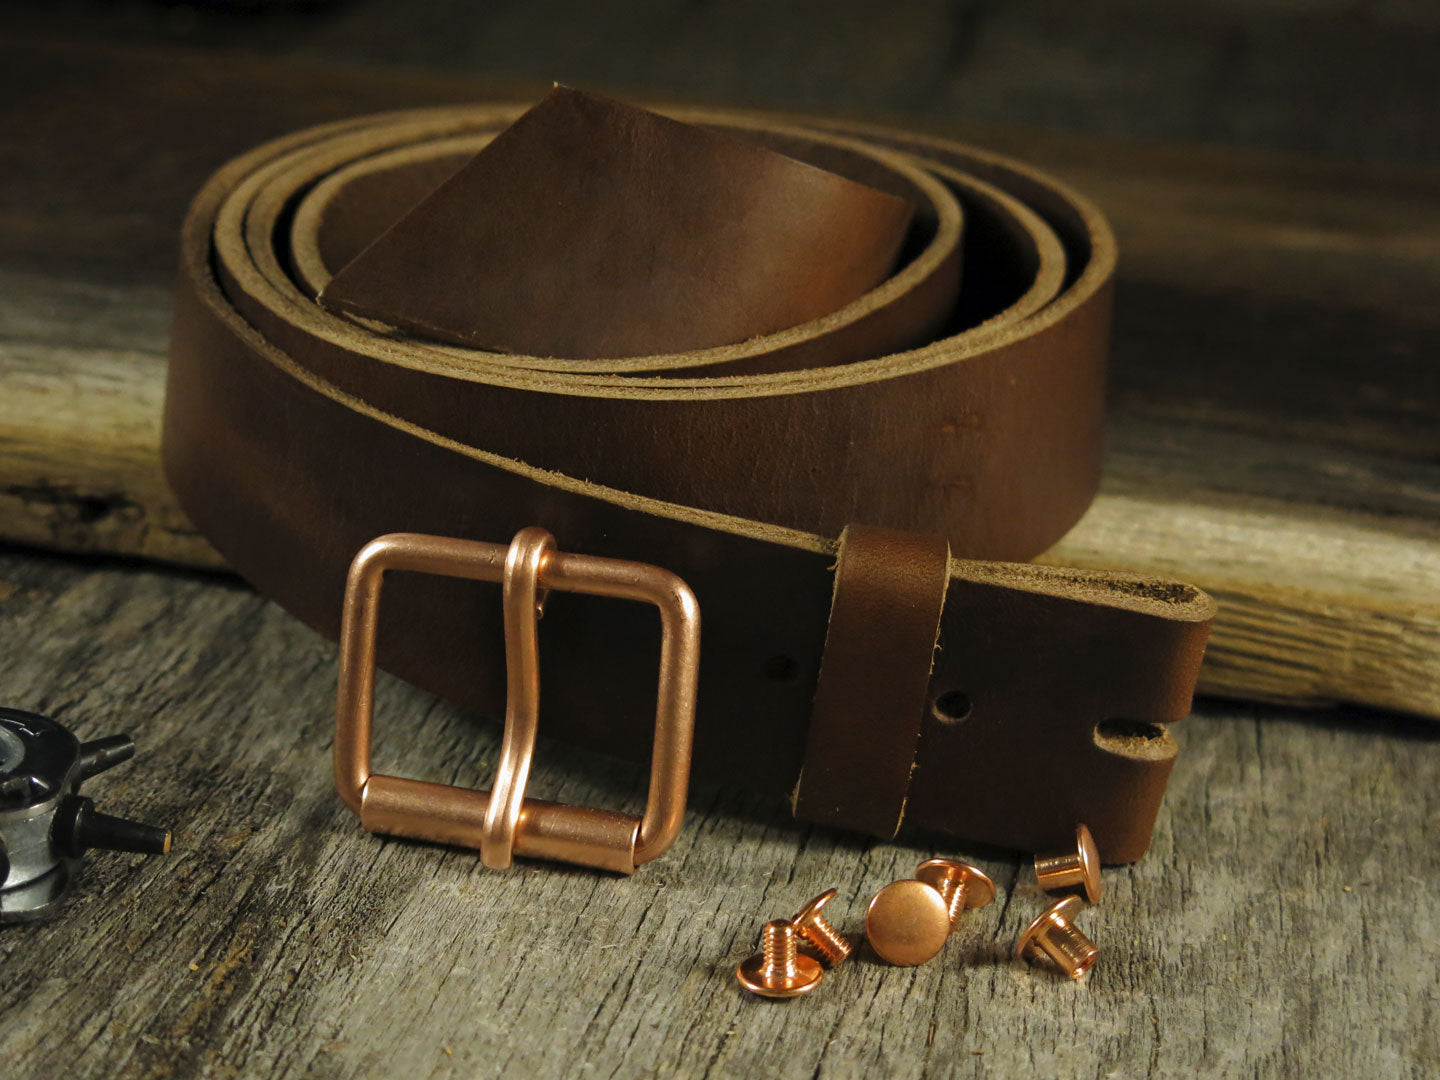 Copper Buckle - Roller Buckle - Copper Belt Buckle - Made in America - Solid Copper Buckles 1 3/8 / No Rotary Leather Punch